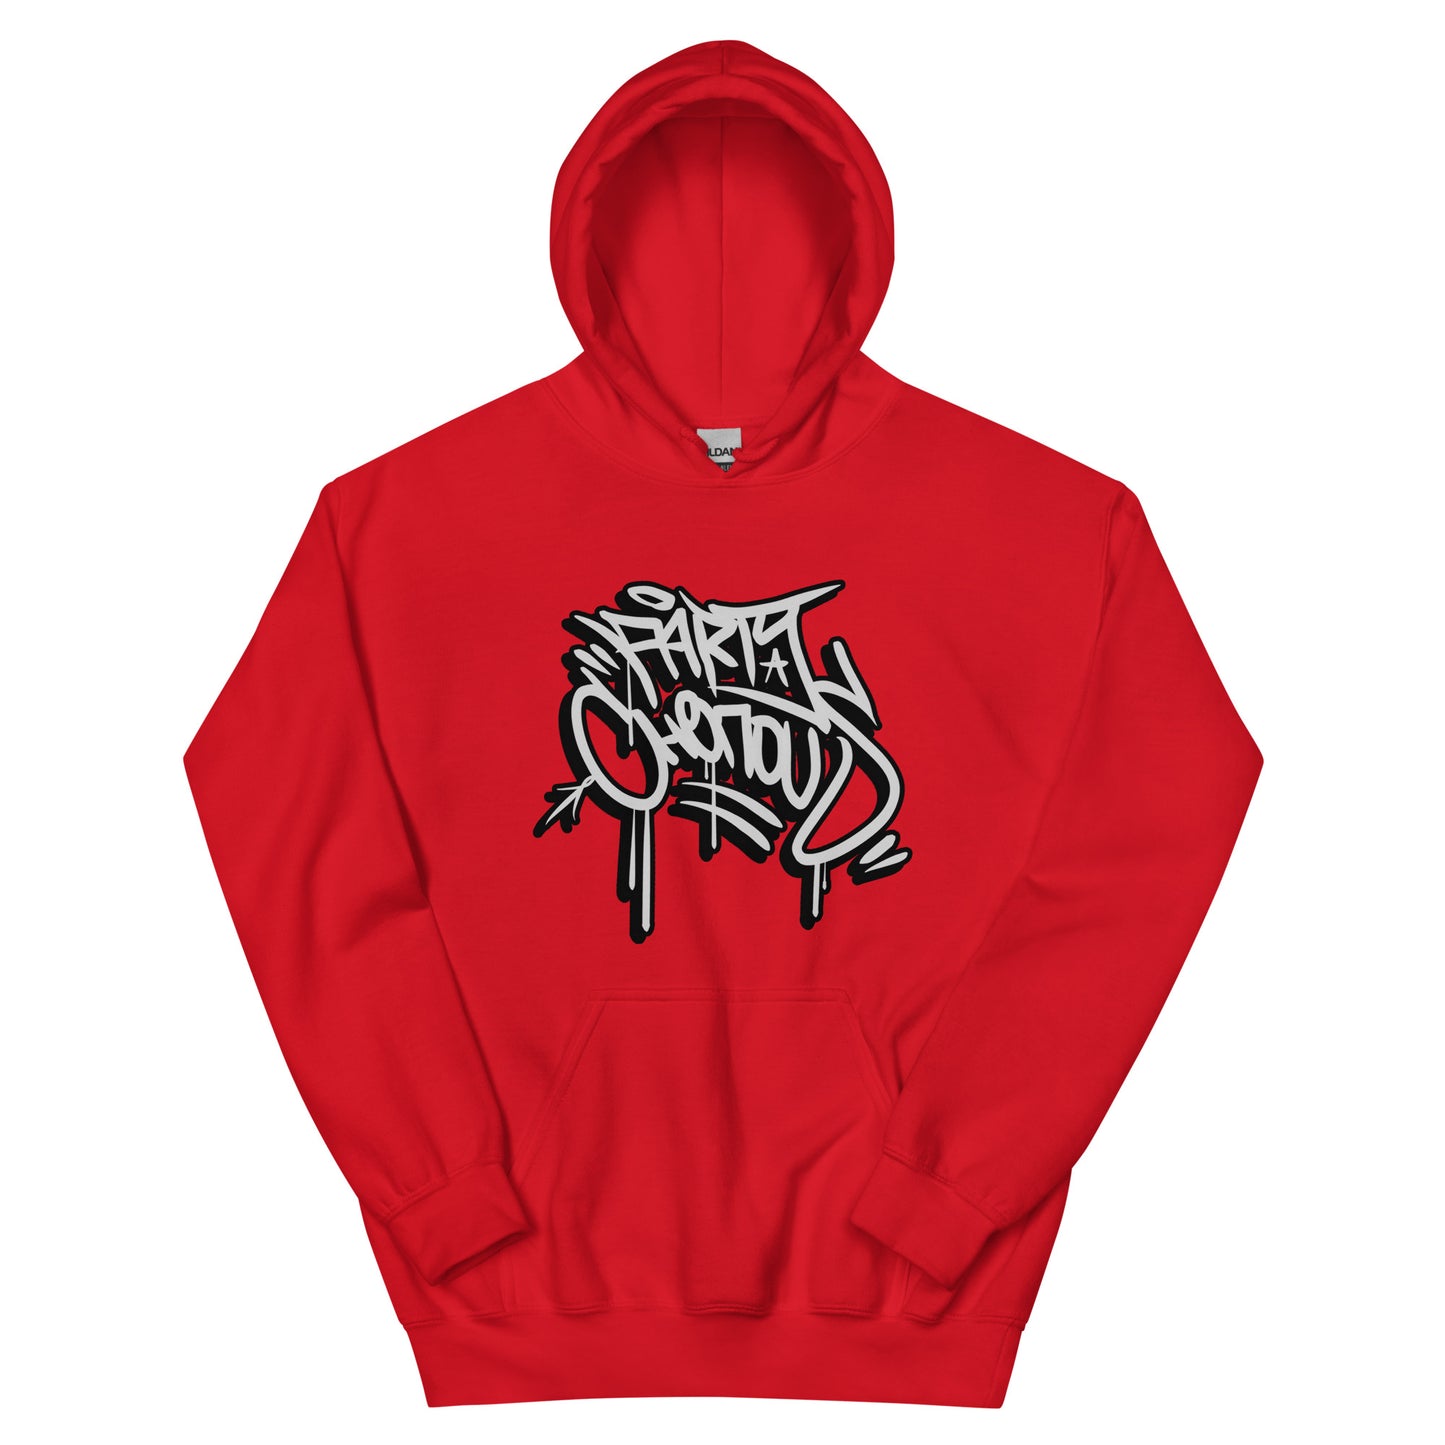 Party Chenous hoodie